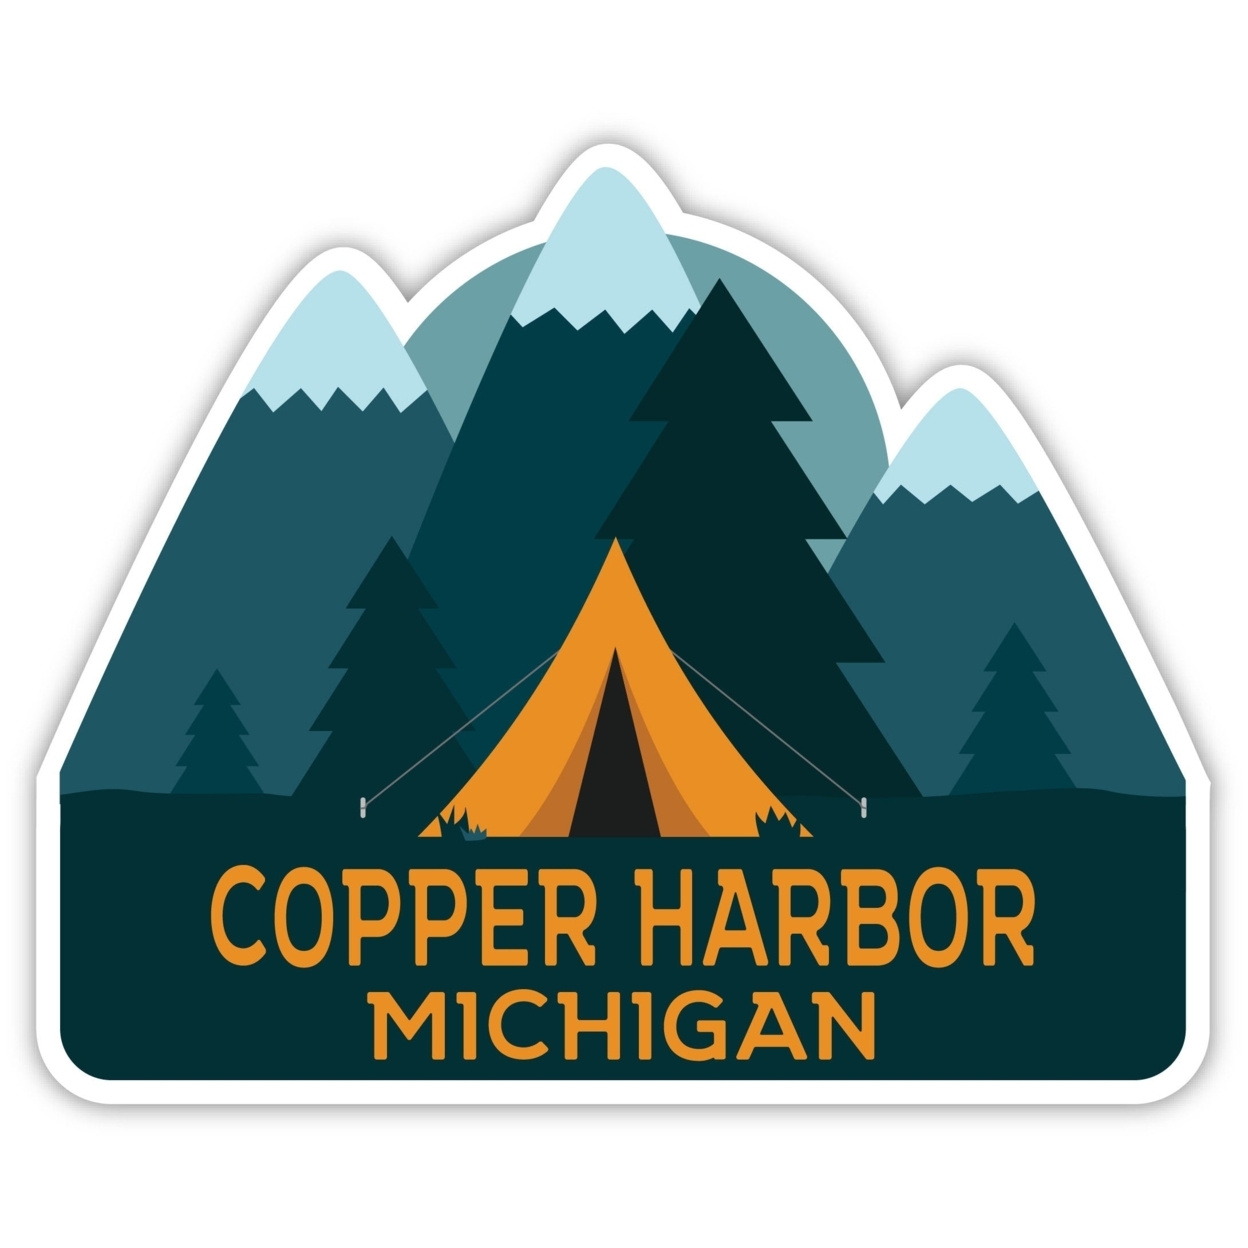 Copper Harbor Michigan Souvenir Decorative Stickers (Choose Theme And Size) - 4-Pack, 10-Inch, Adventures Awaits